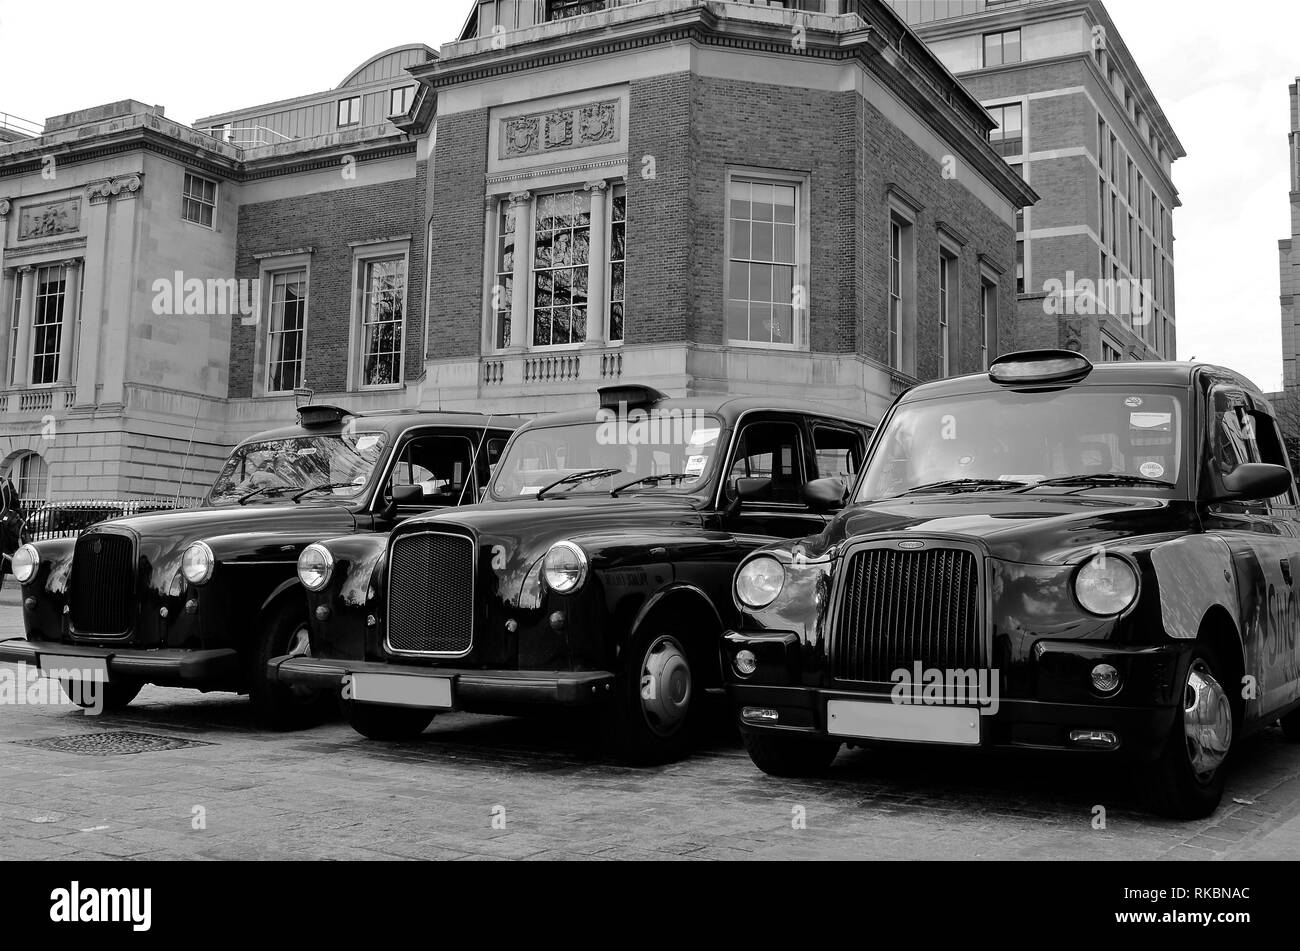 London vintage cabs waiting in the street. Black and white. United Kingdom Stock Photo